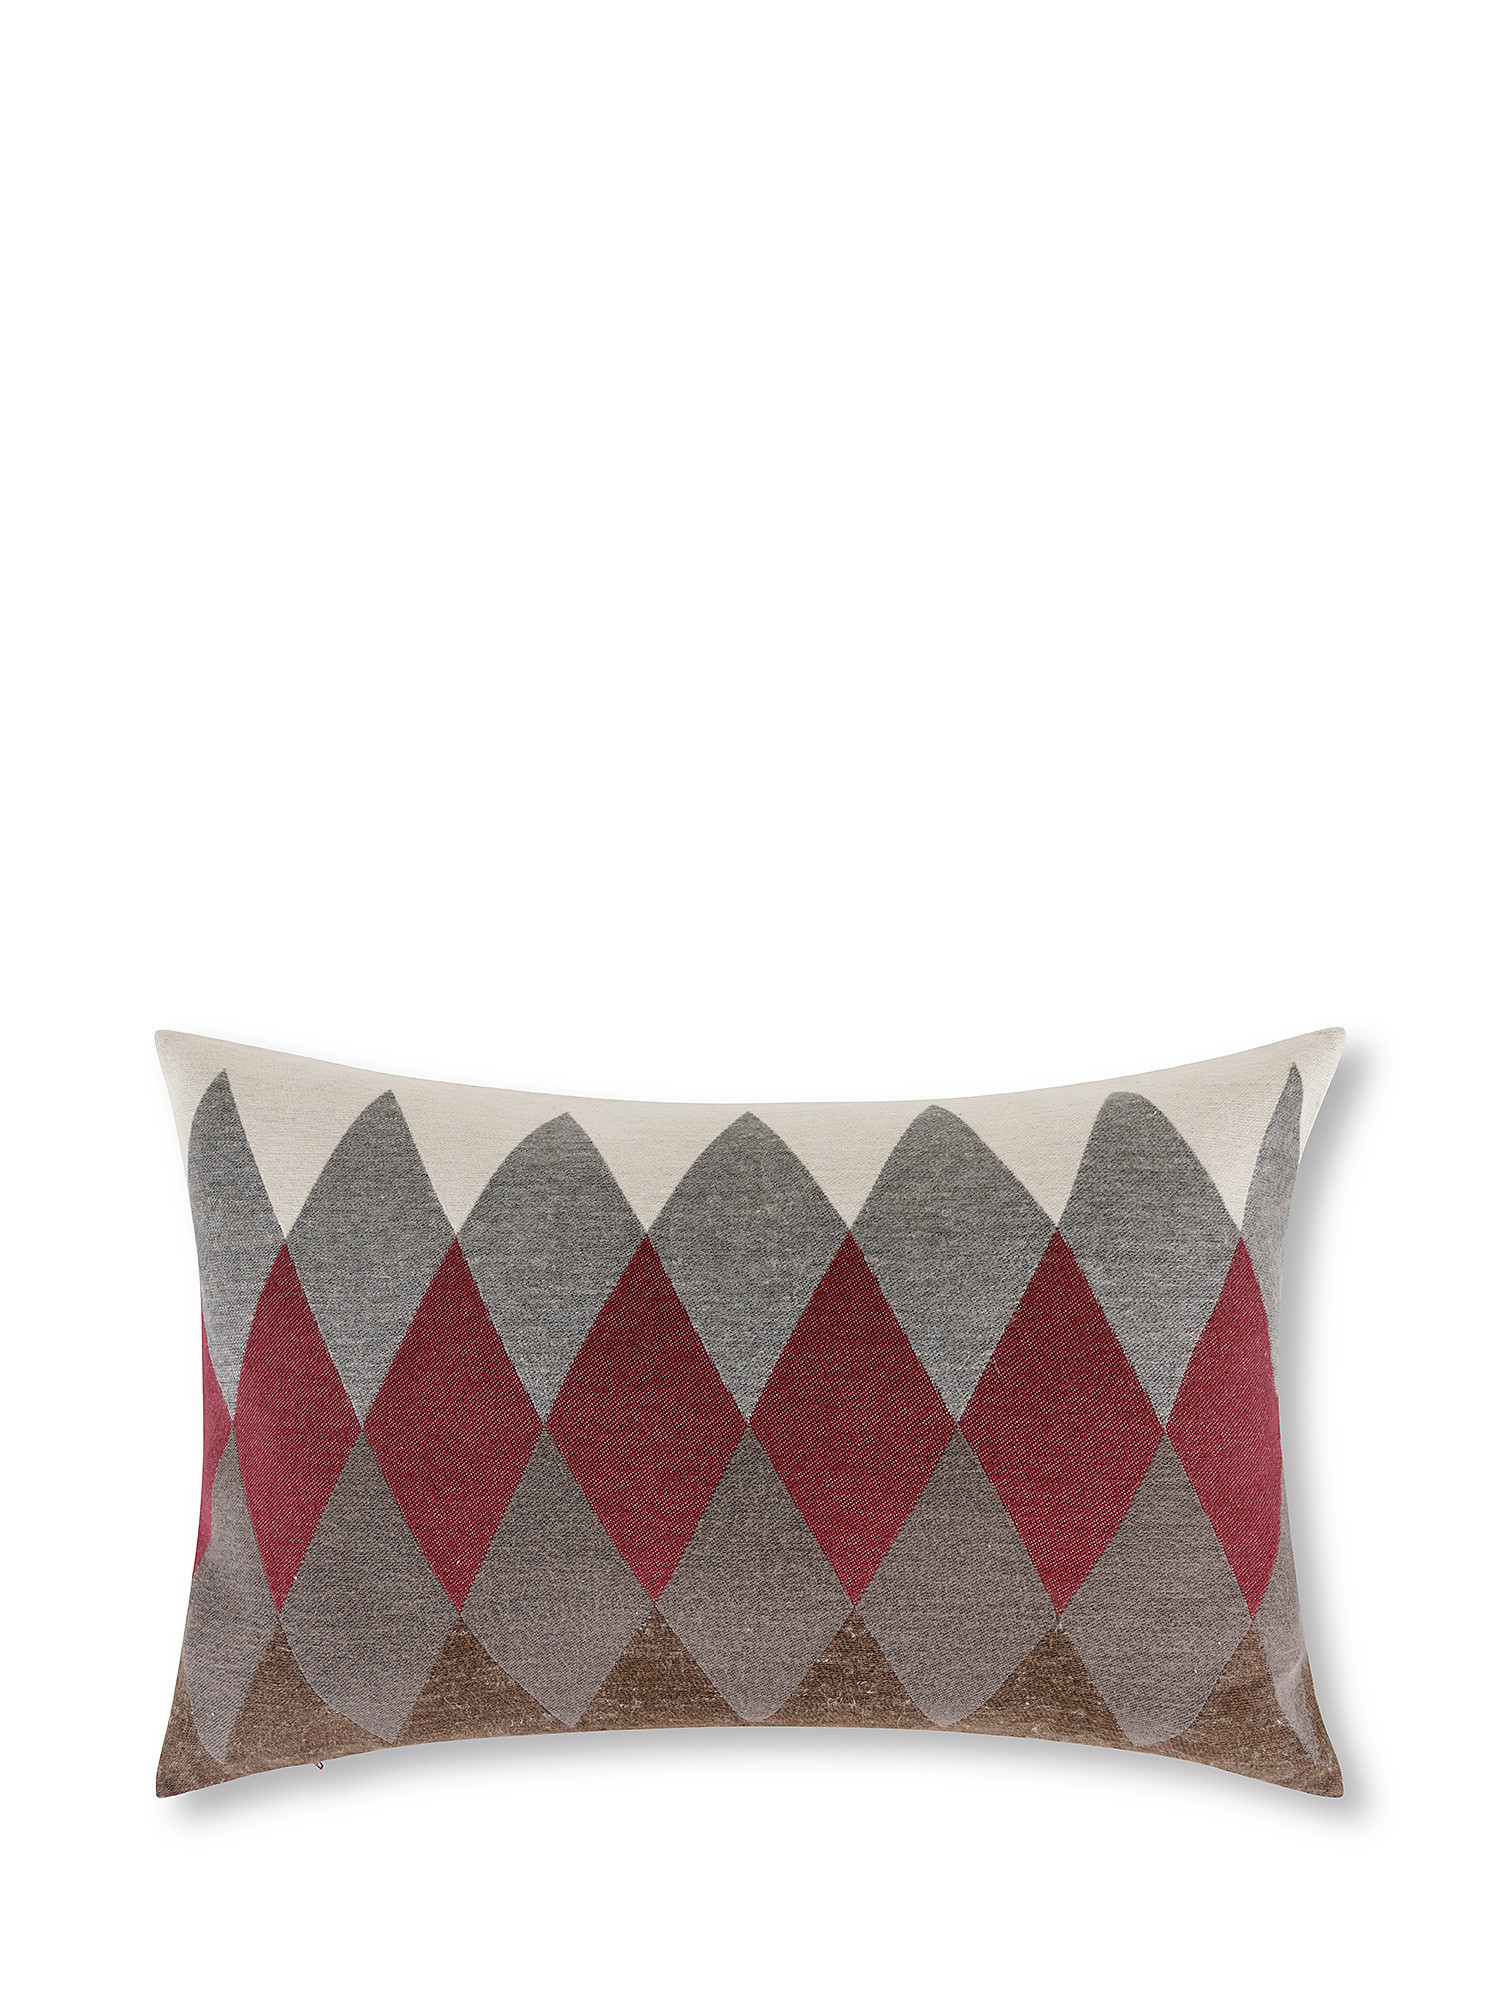 Jacquard cushion with diamond pattern 35x55cm, Brown, large image number 0